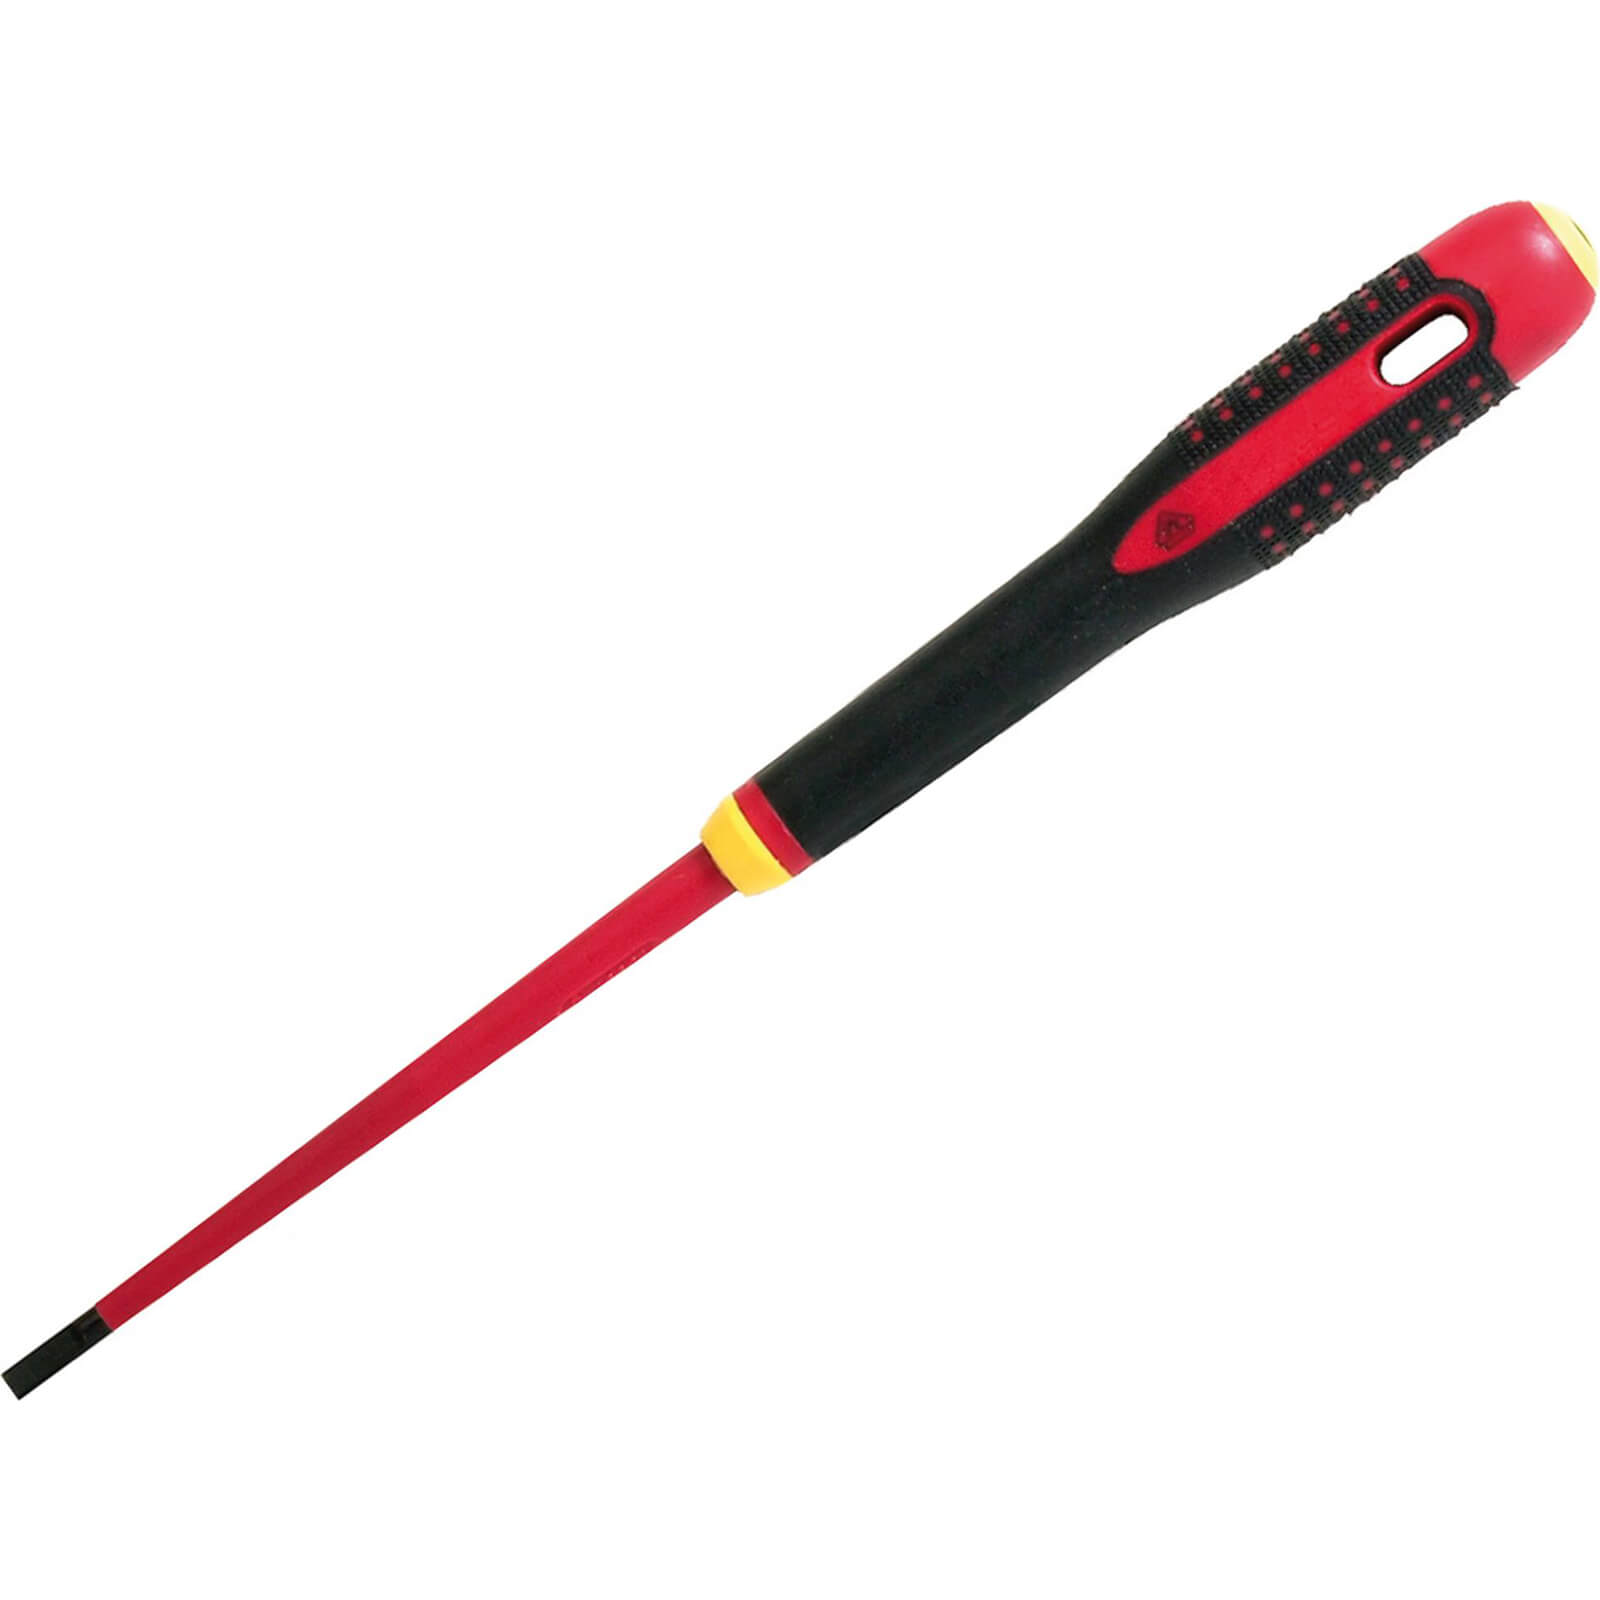 Photo of Bahco Ergo Slim Vde Insulated Slotted Screwdriver 3mm 100mm